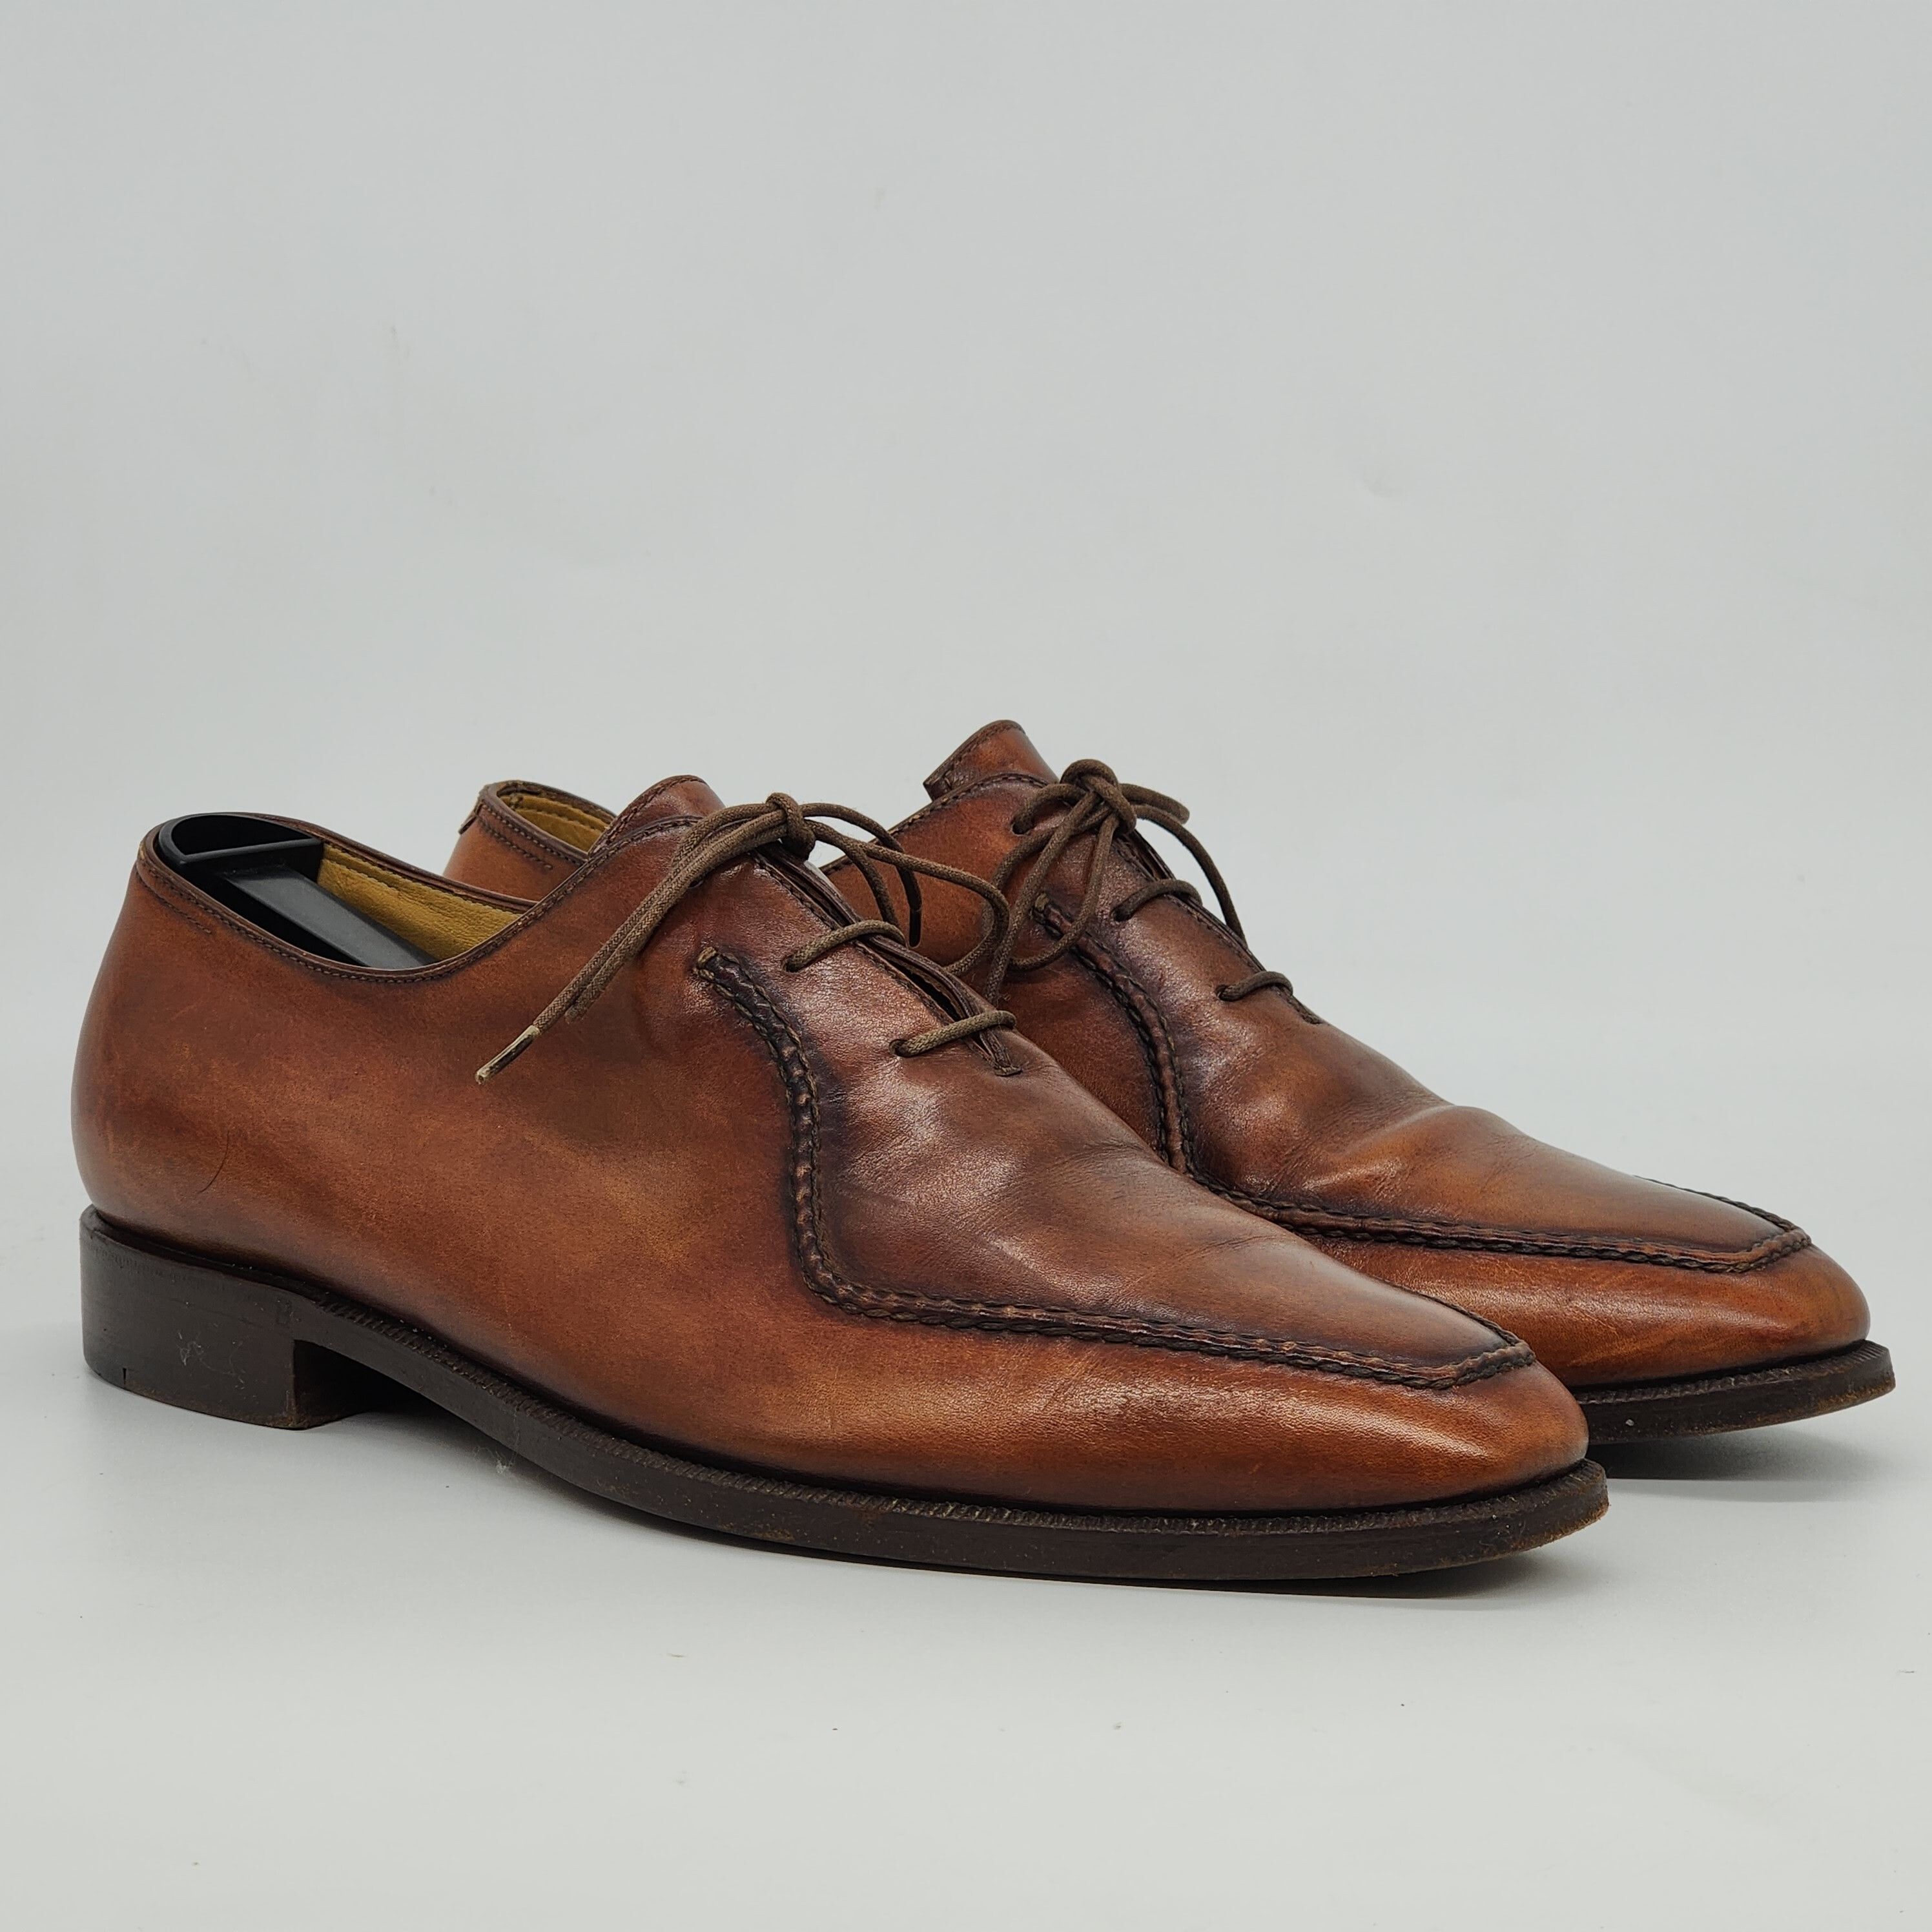 Berluti - Stitched Detail Leather Oxford Shoes - 1